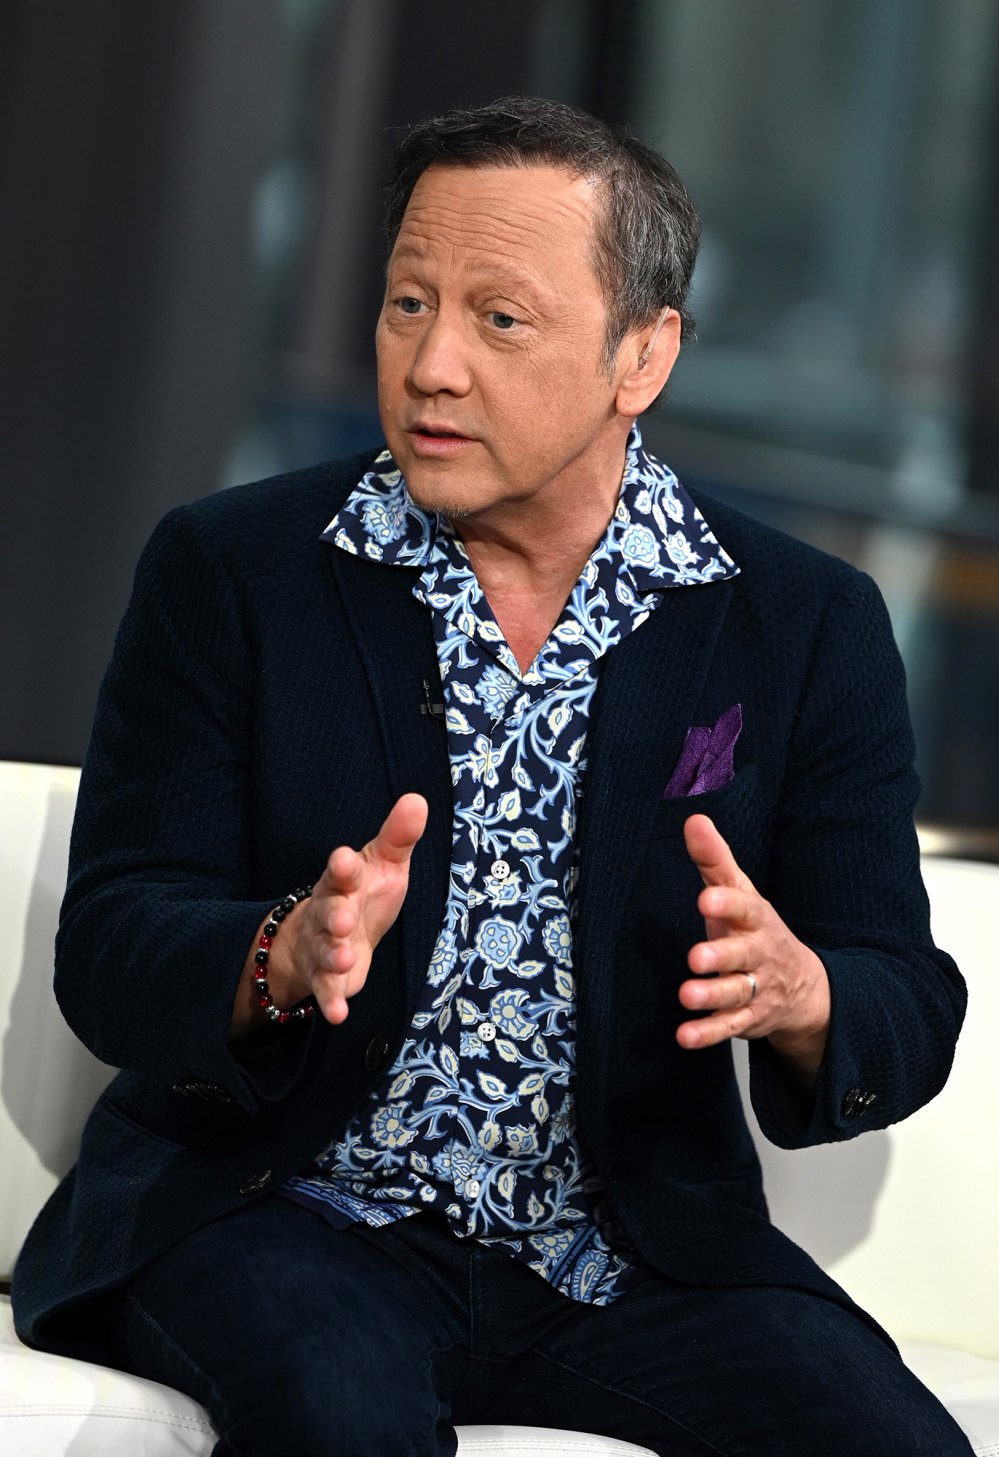 Rob Schneider Asked to End Charity Gala Set Early Due to Offensive Jokes: ‘Awkward as Hell’